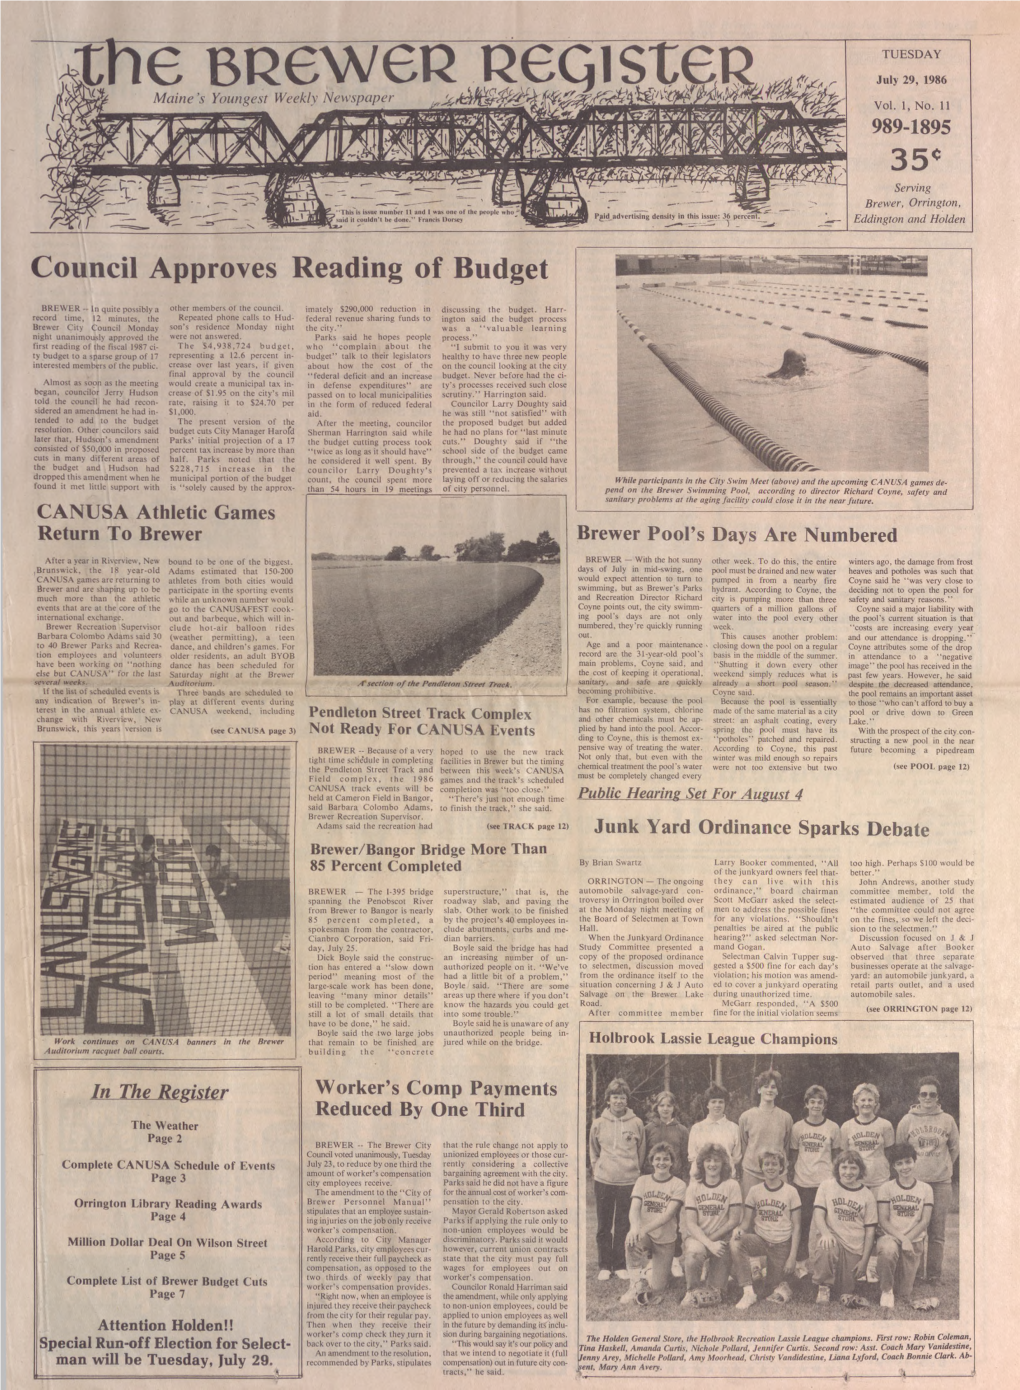 The Brewer Register : July 29, 1986